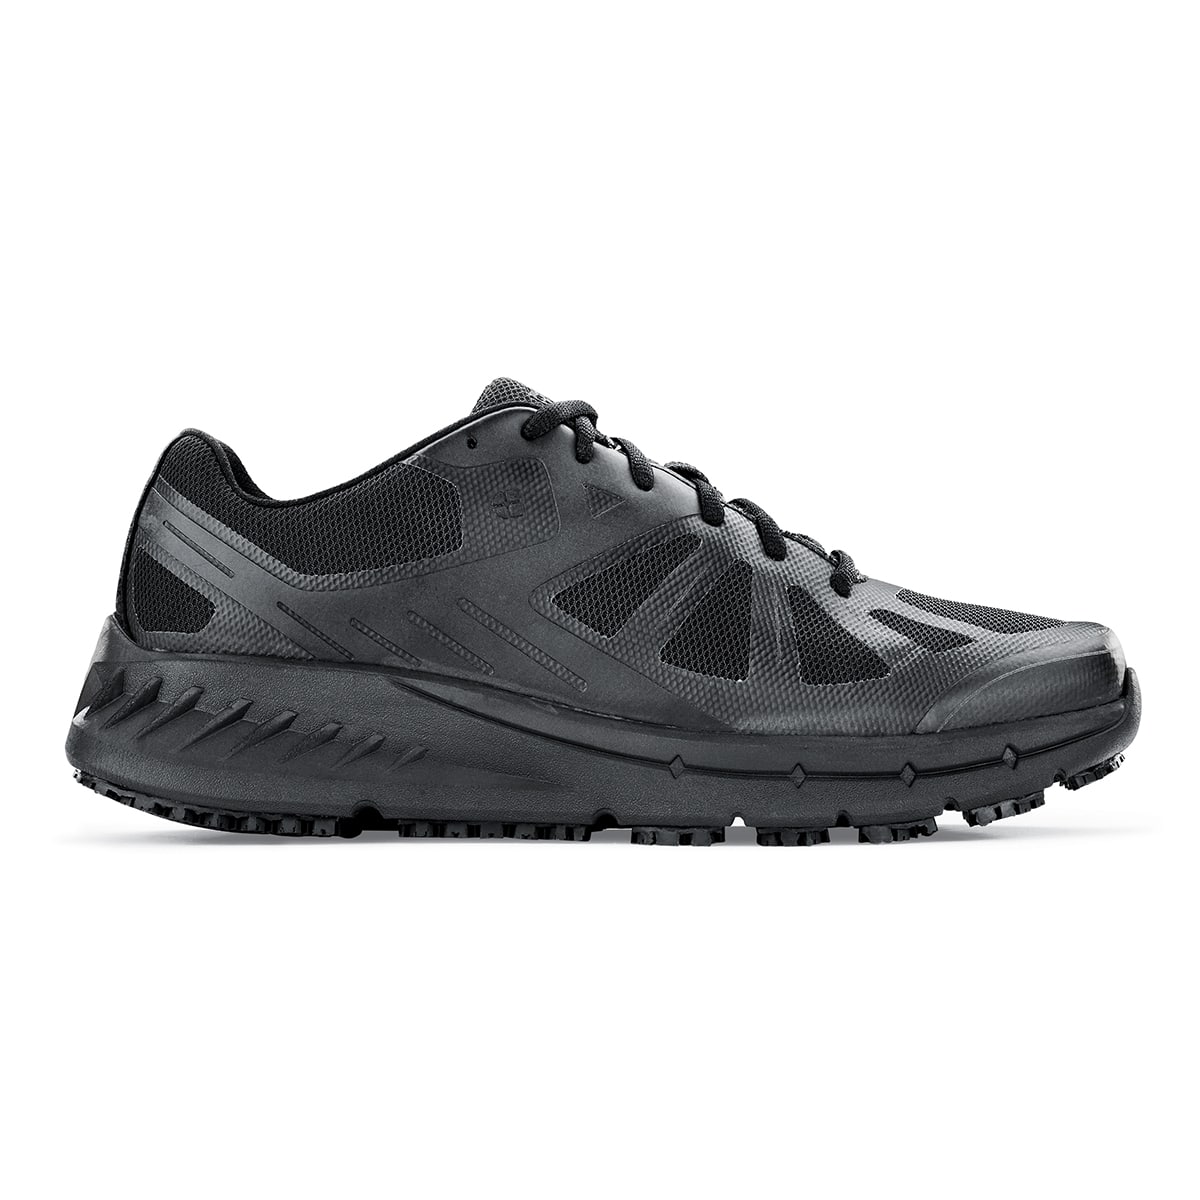 The Endurance II from Shoes For Crews is a slip-resistant shoe that features a Spill Guard to help keep out liquids, TripGuard and Flex Tread, seen from the right.